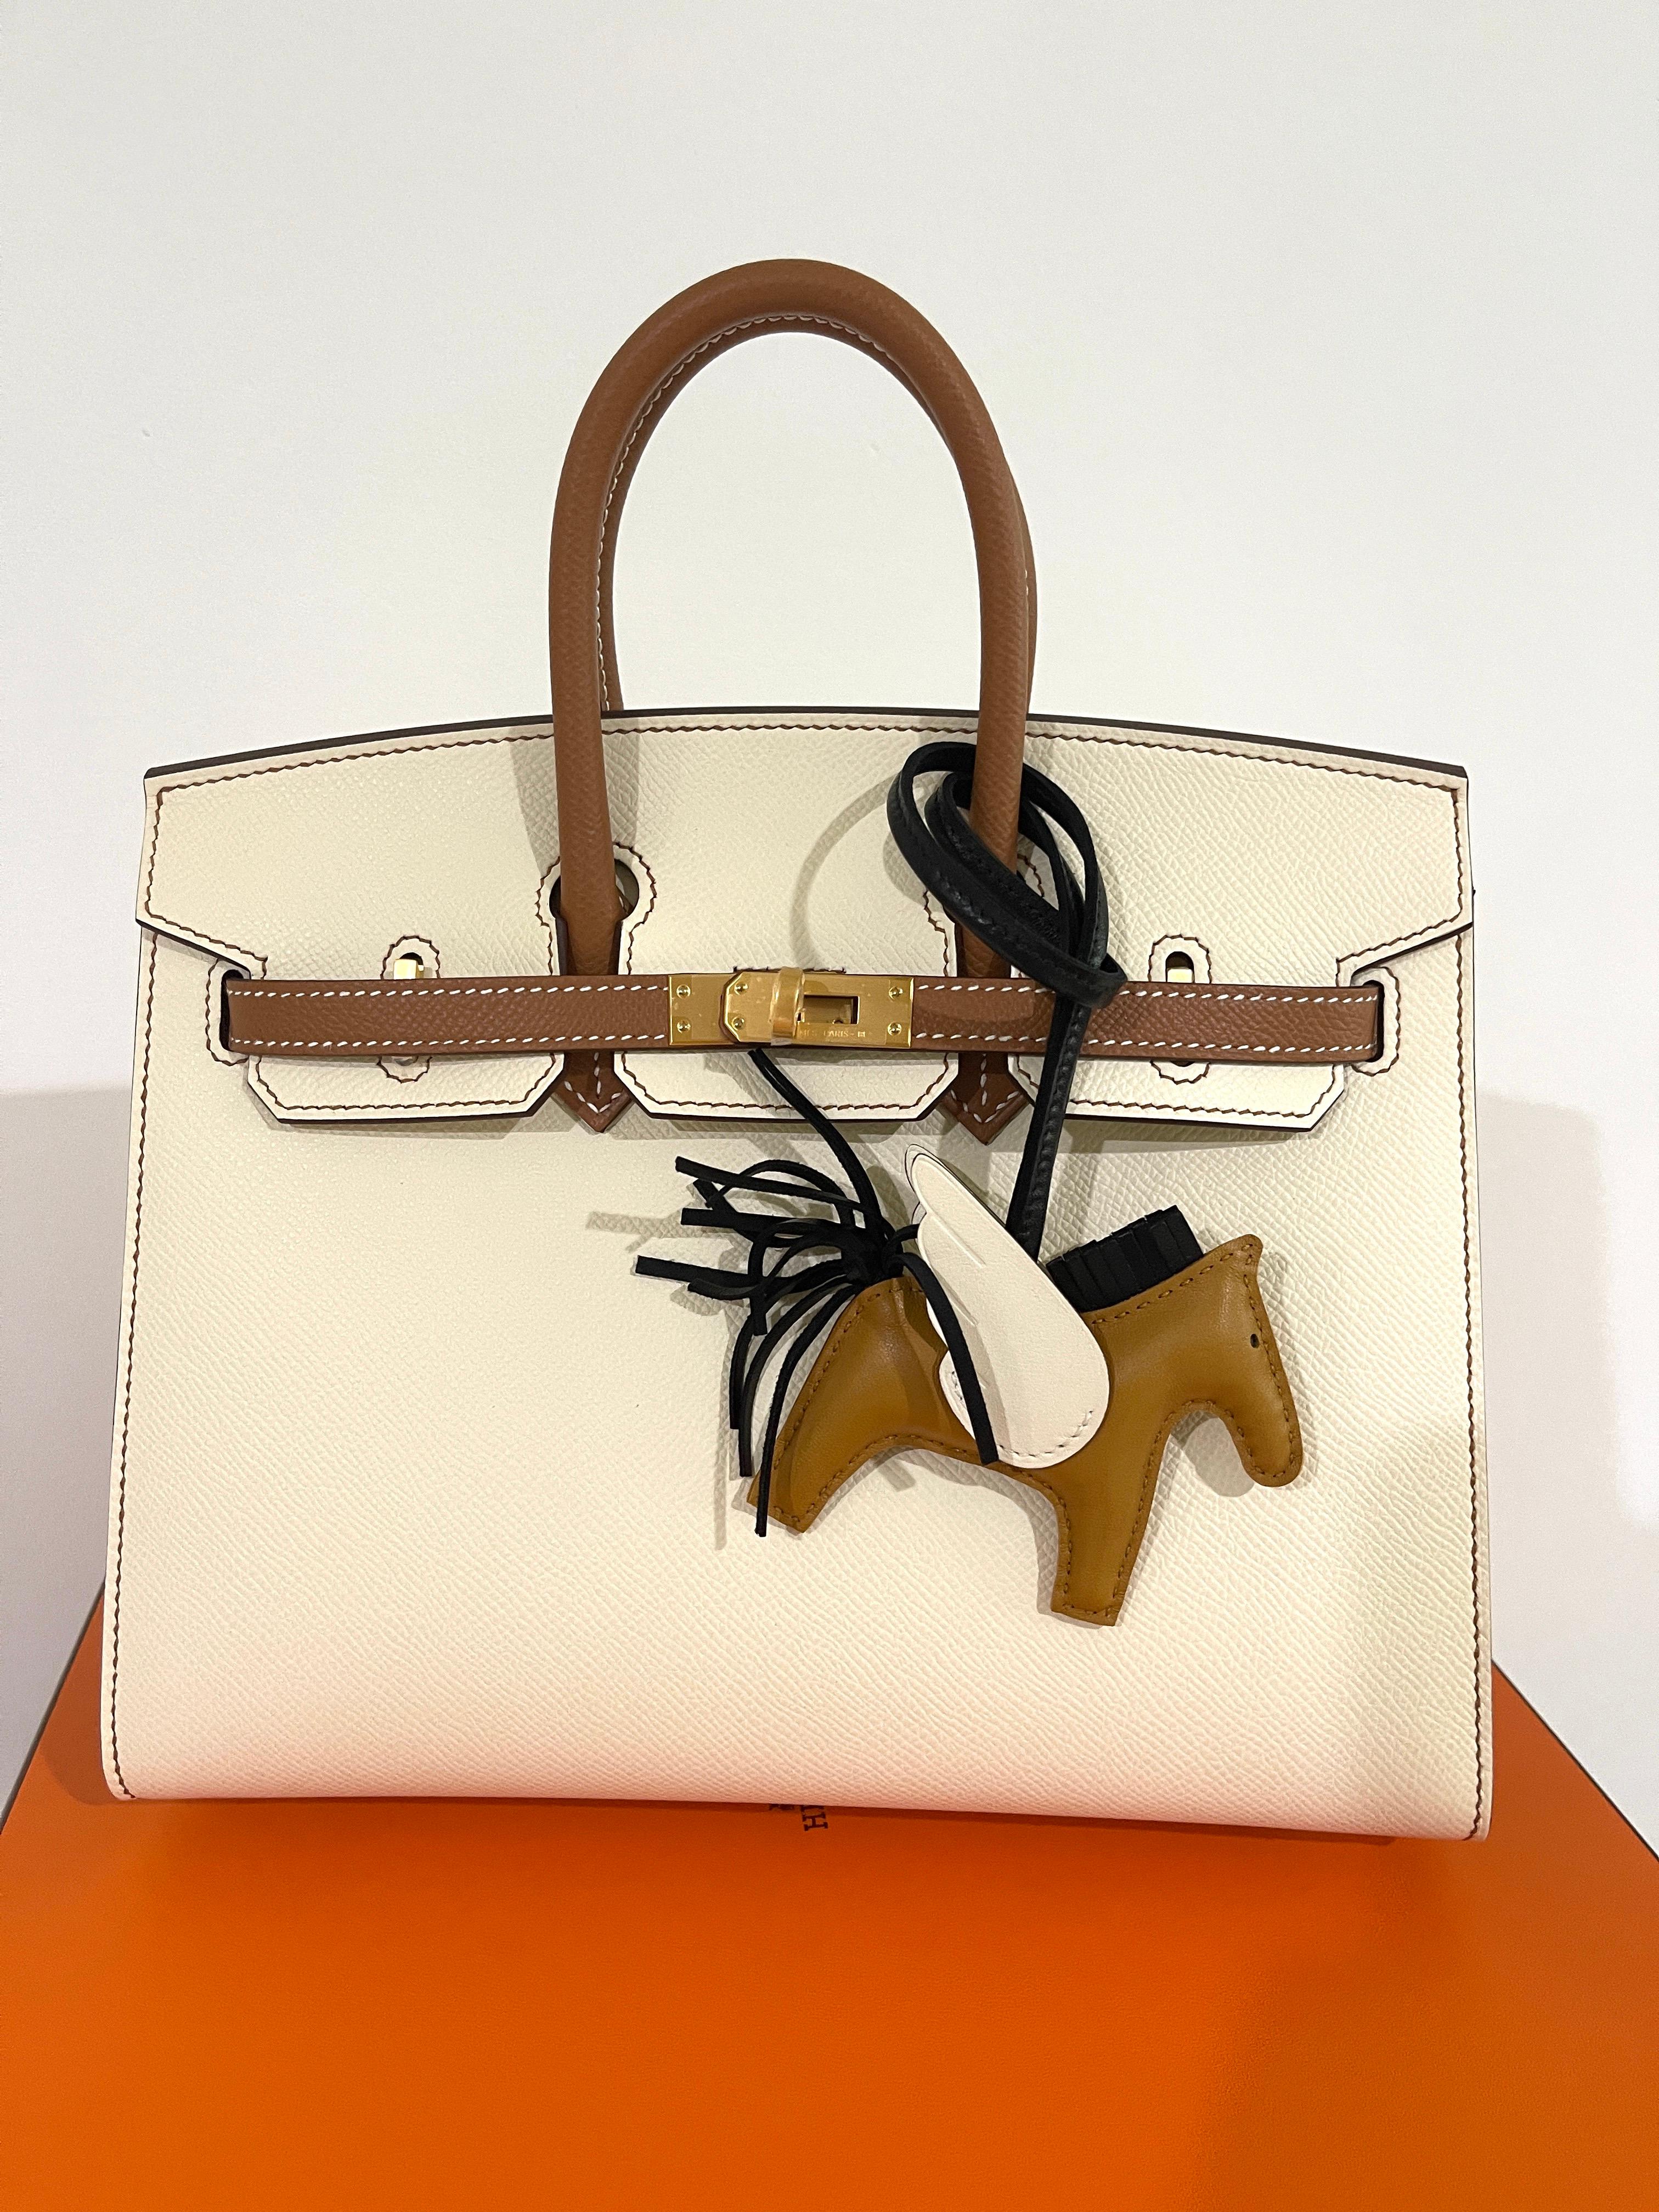 Hermes Sellier Birkin Special Order
Exquisite VIP order
Why wait a year or more when you can purchase this beauty now?
Nata and Gold Epsom with Brushed Gold Hardware
The best neutral combination around
Everyone loves these 2 colors
Contrast